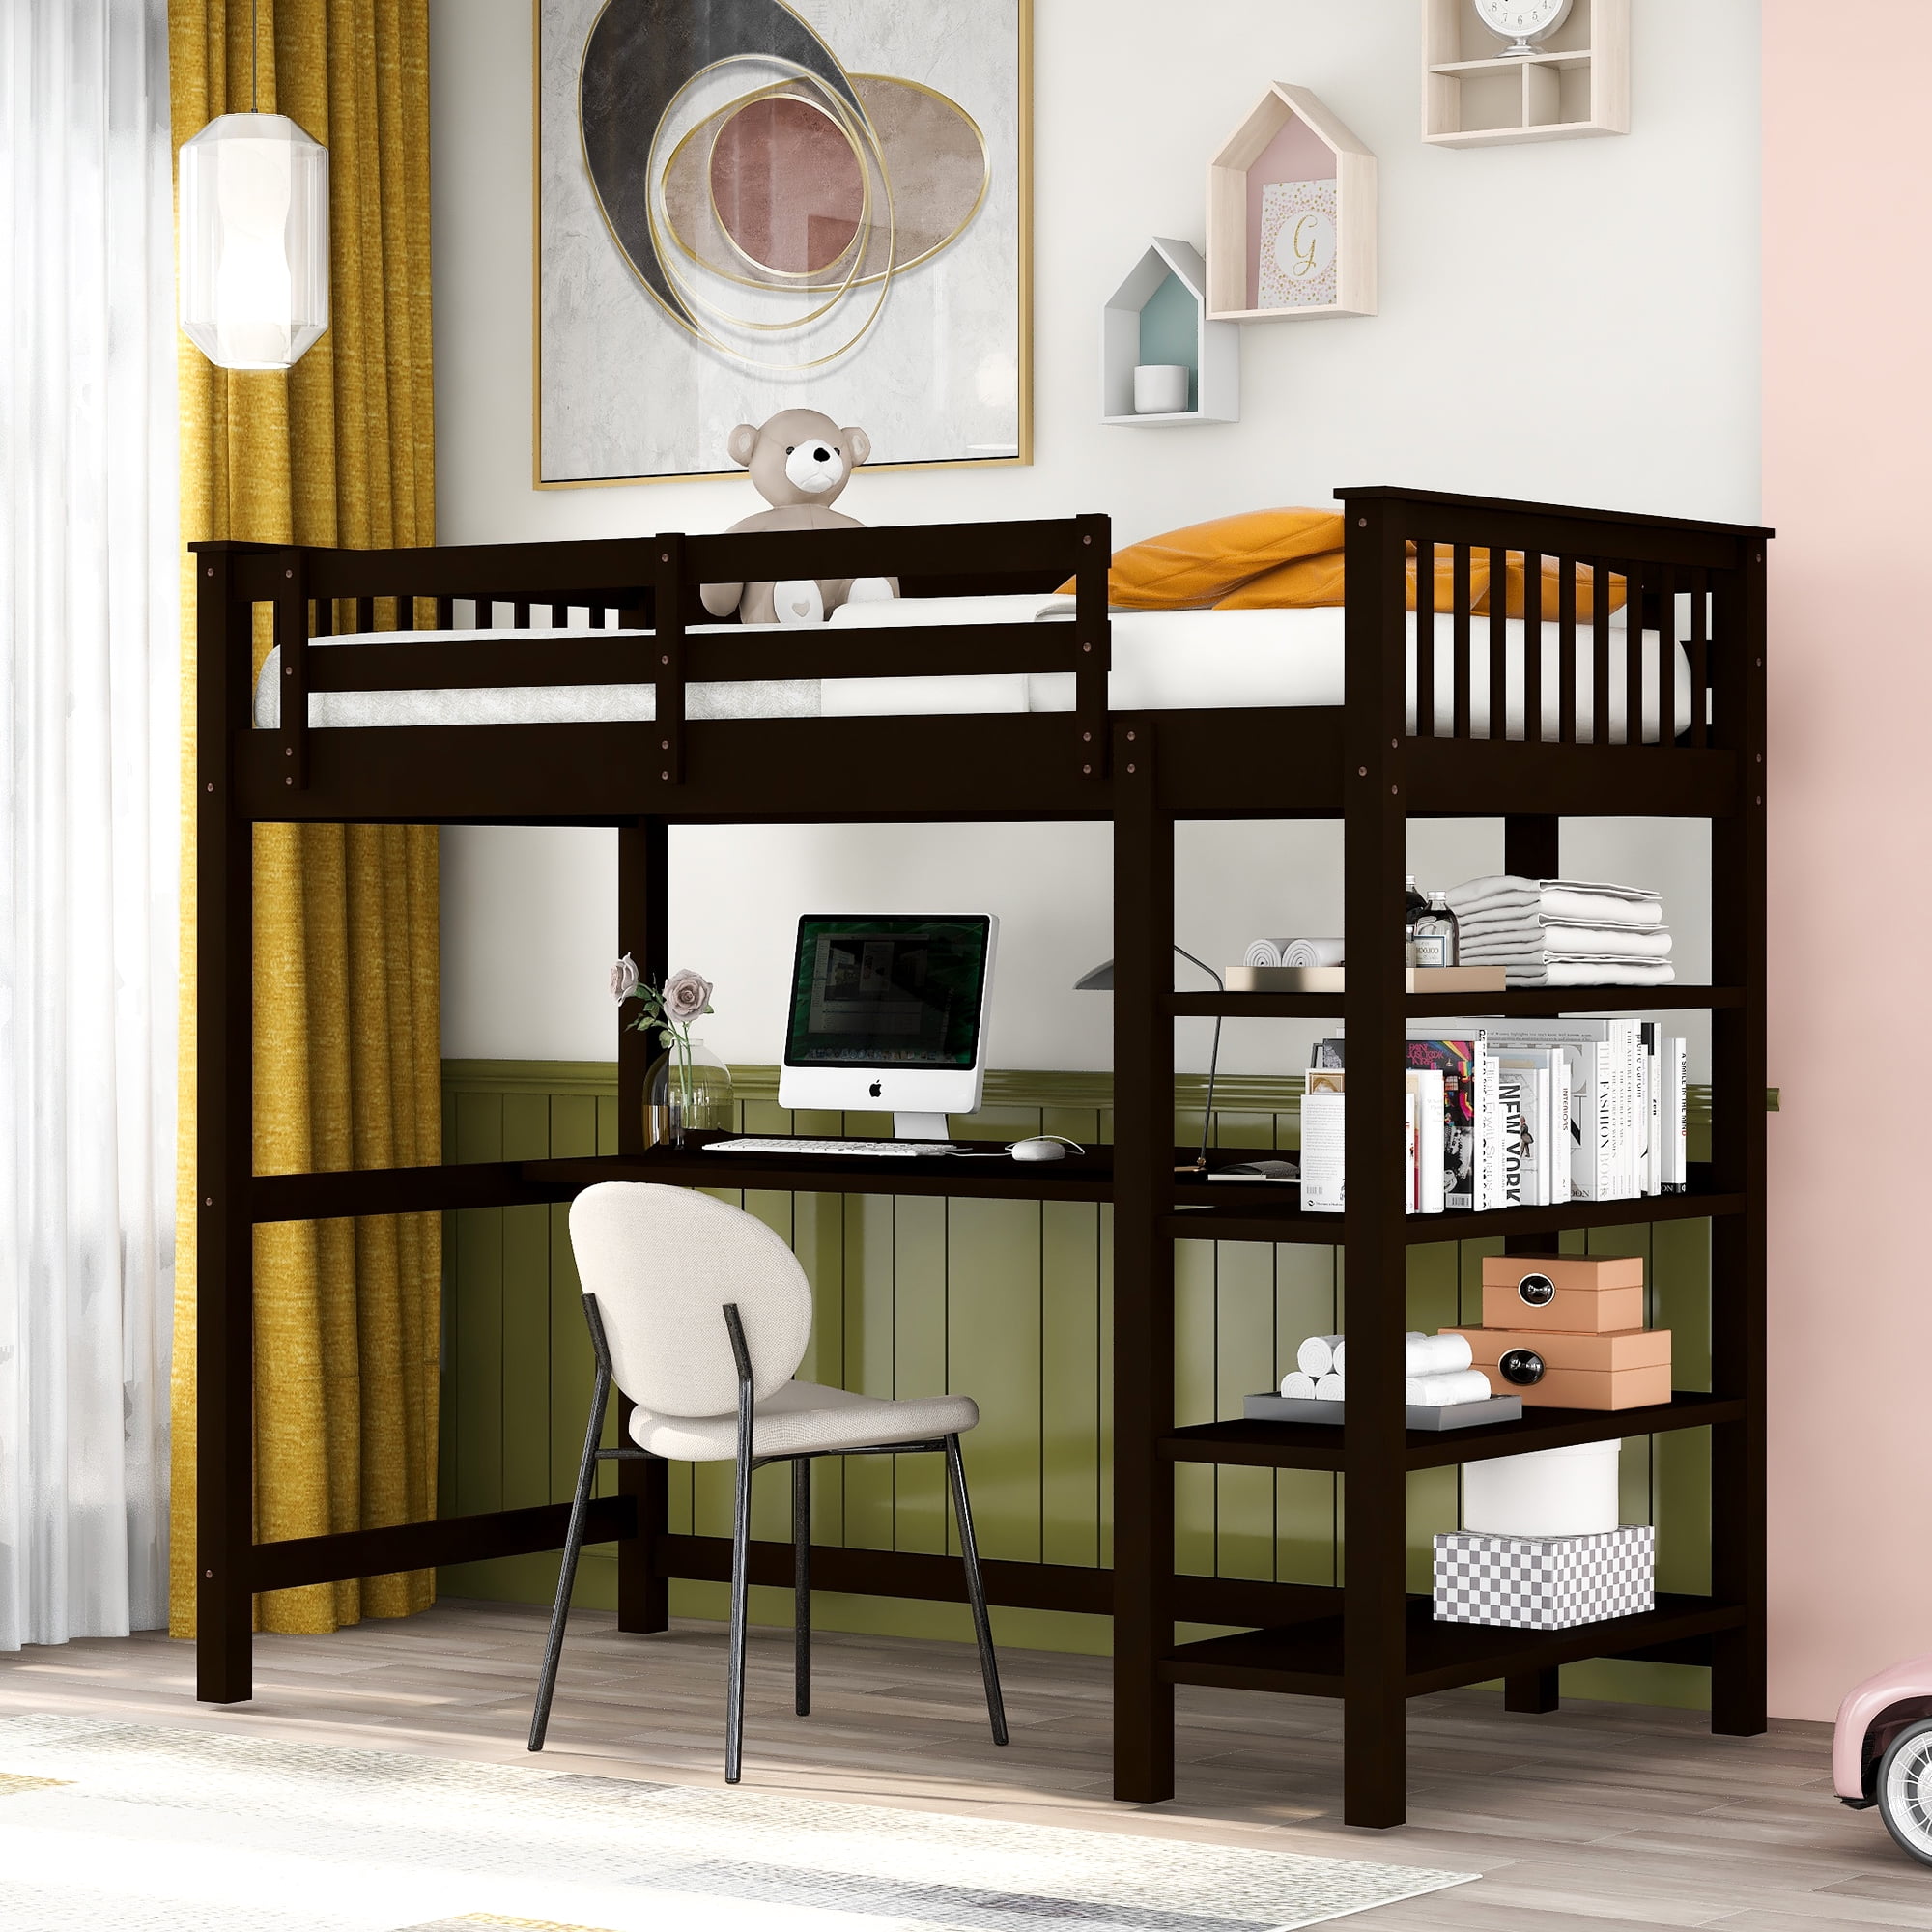 Euroco Wood Twin Loft Bed With Desk, Loft Bed With Desk And Shelf